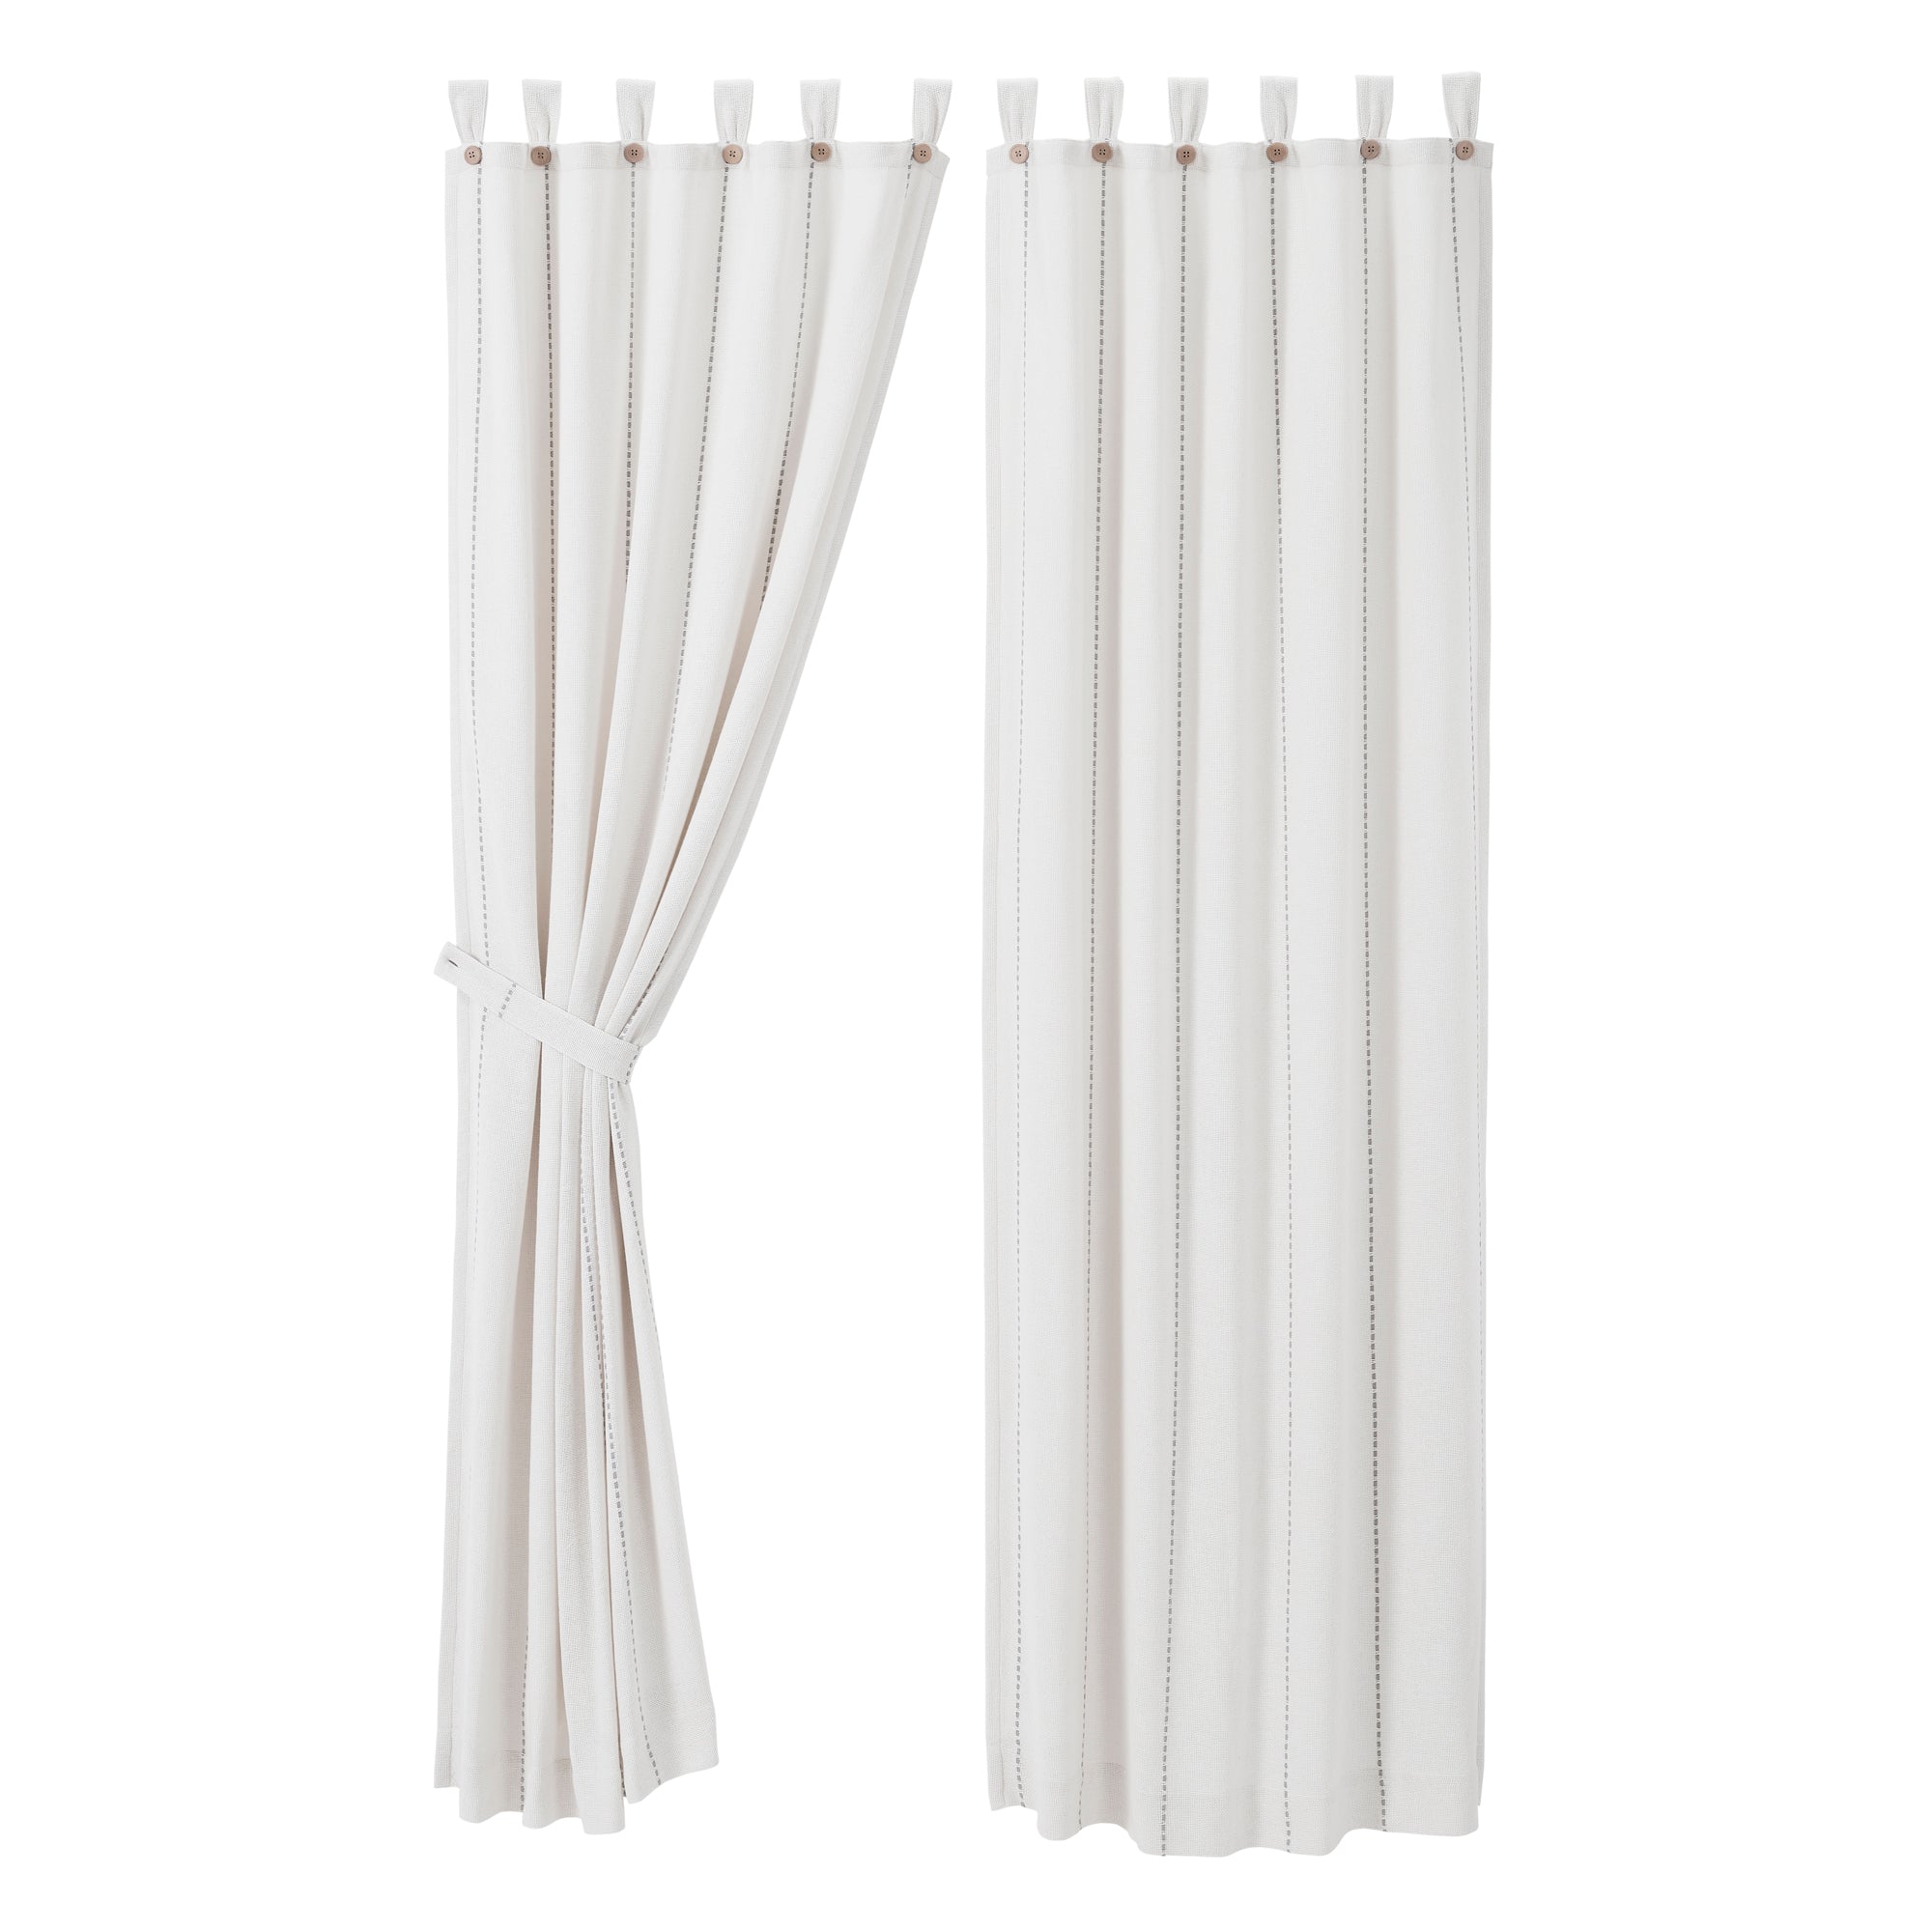 Stitched Burlap White Panel Curtain Set of 2 84x40 VHC Brands